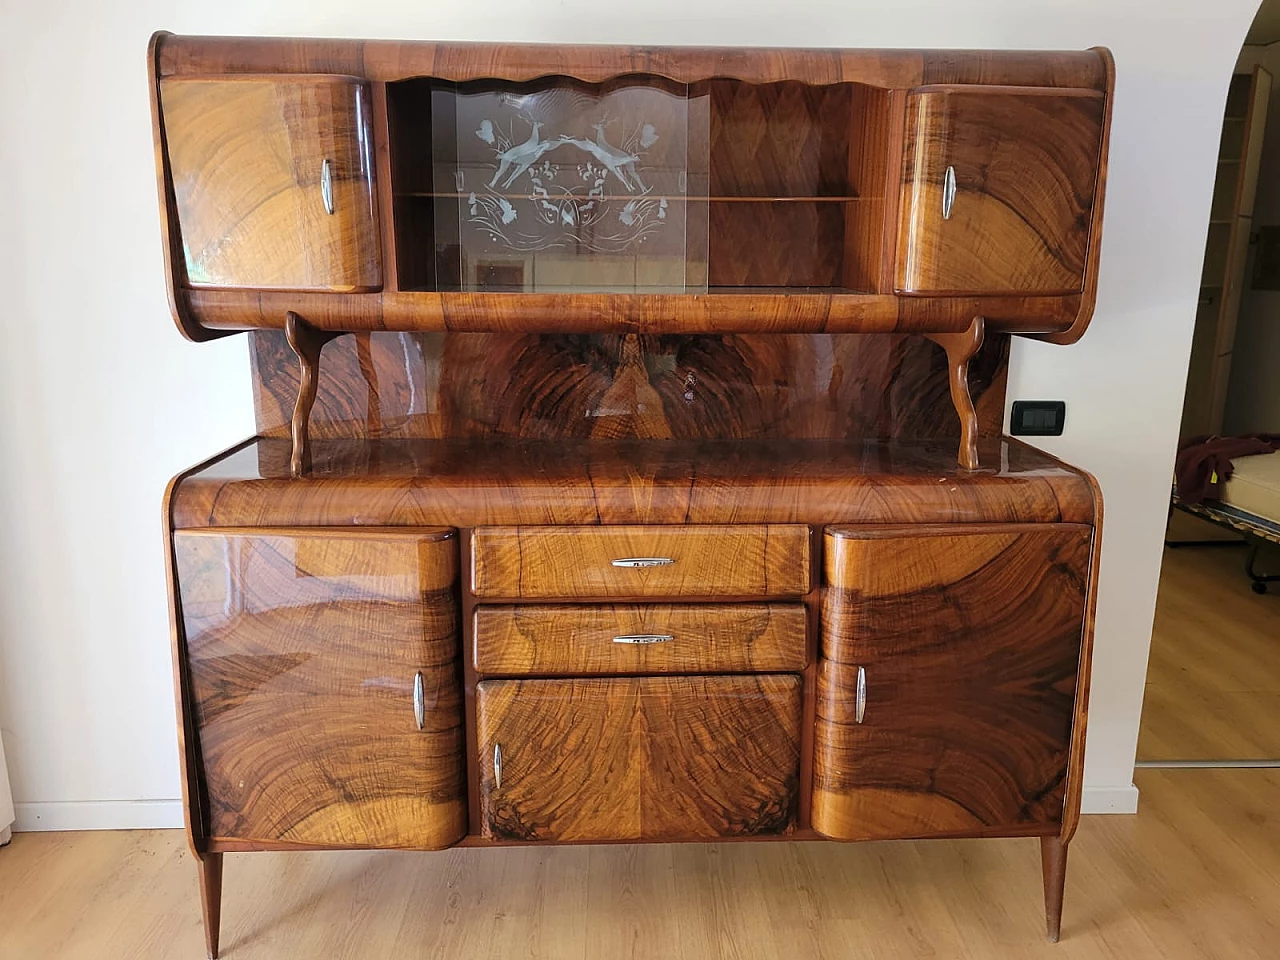 Two-body sideboard in curved wood with display case, 1940s 1